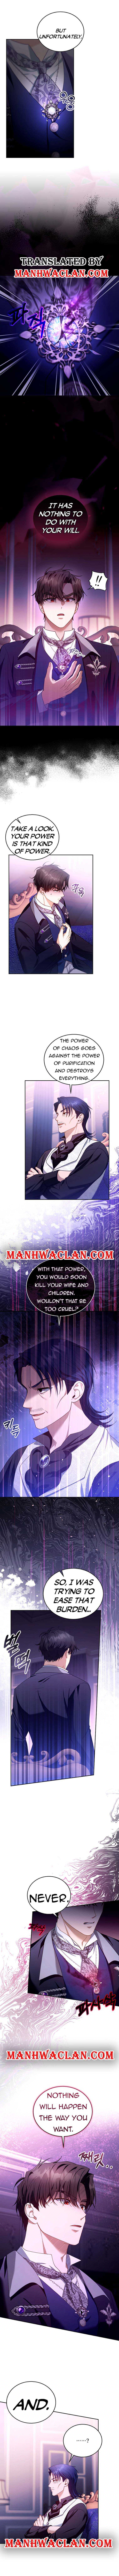 I Plan To Divorce My Villain Husband, But We Have A Child - 90 page 2-4b34888a